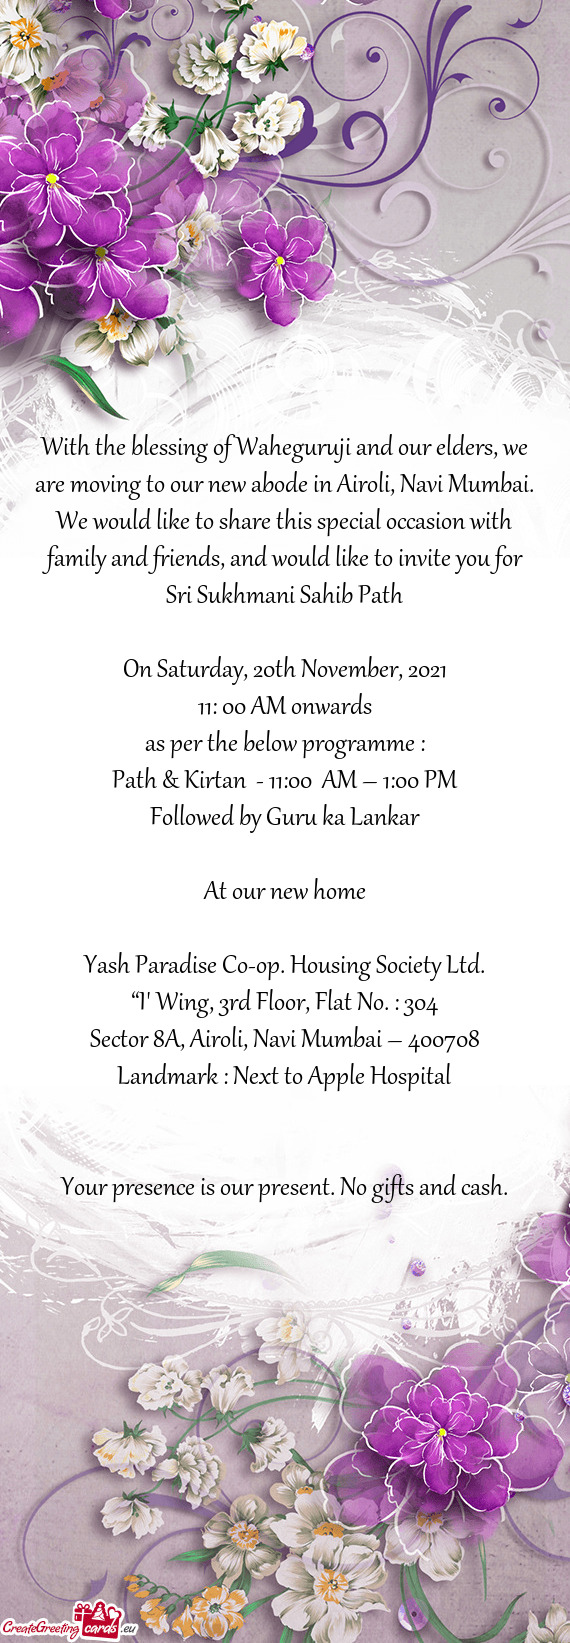 With the blessing of Waheguruji and our elders, we are moving to our new abode in Airoli, Navi Mumba